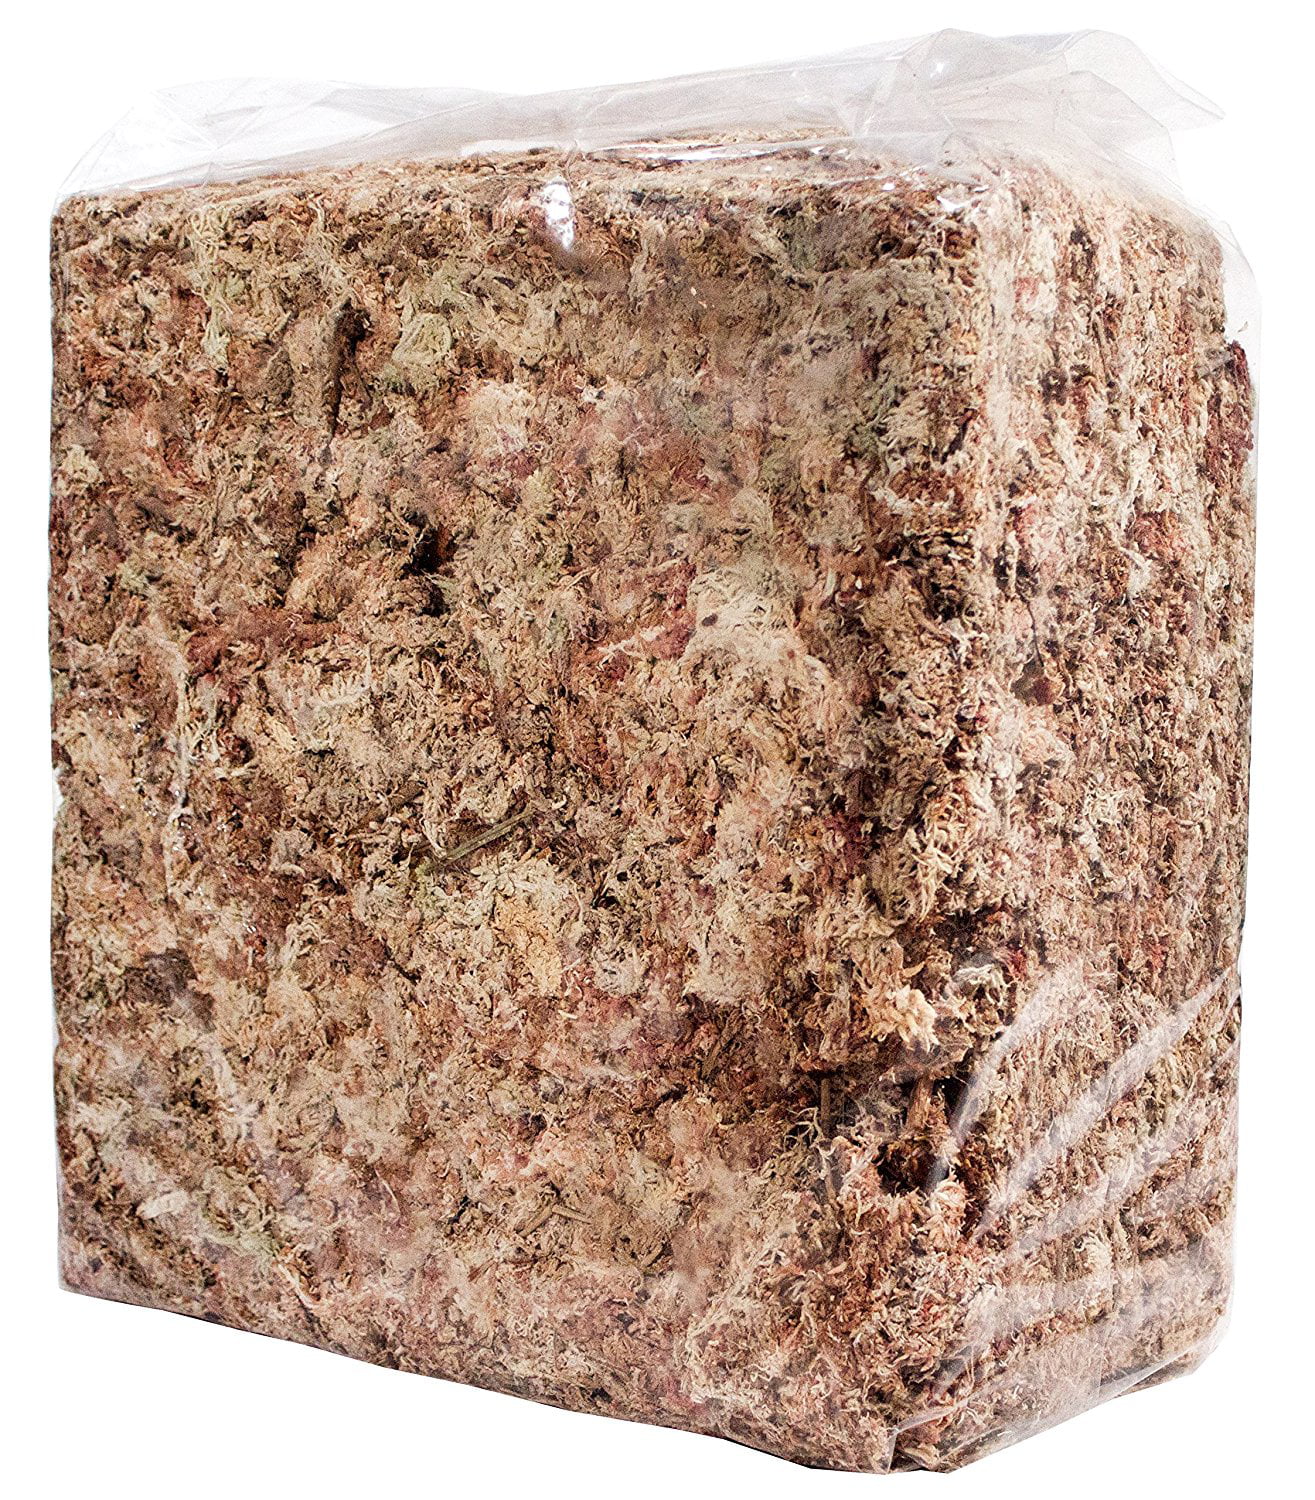 22330 Natural Orchid Sphagnum Moss Dried SuperMoss 2.4lbs Small Bale